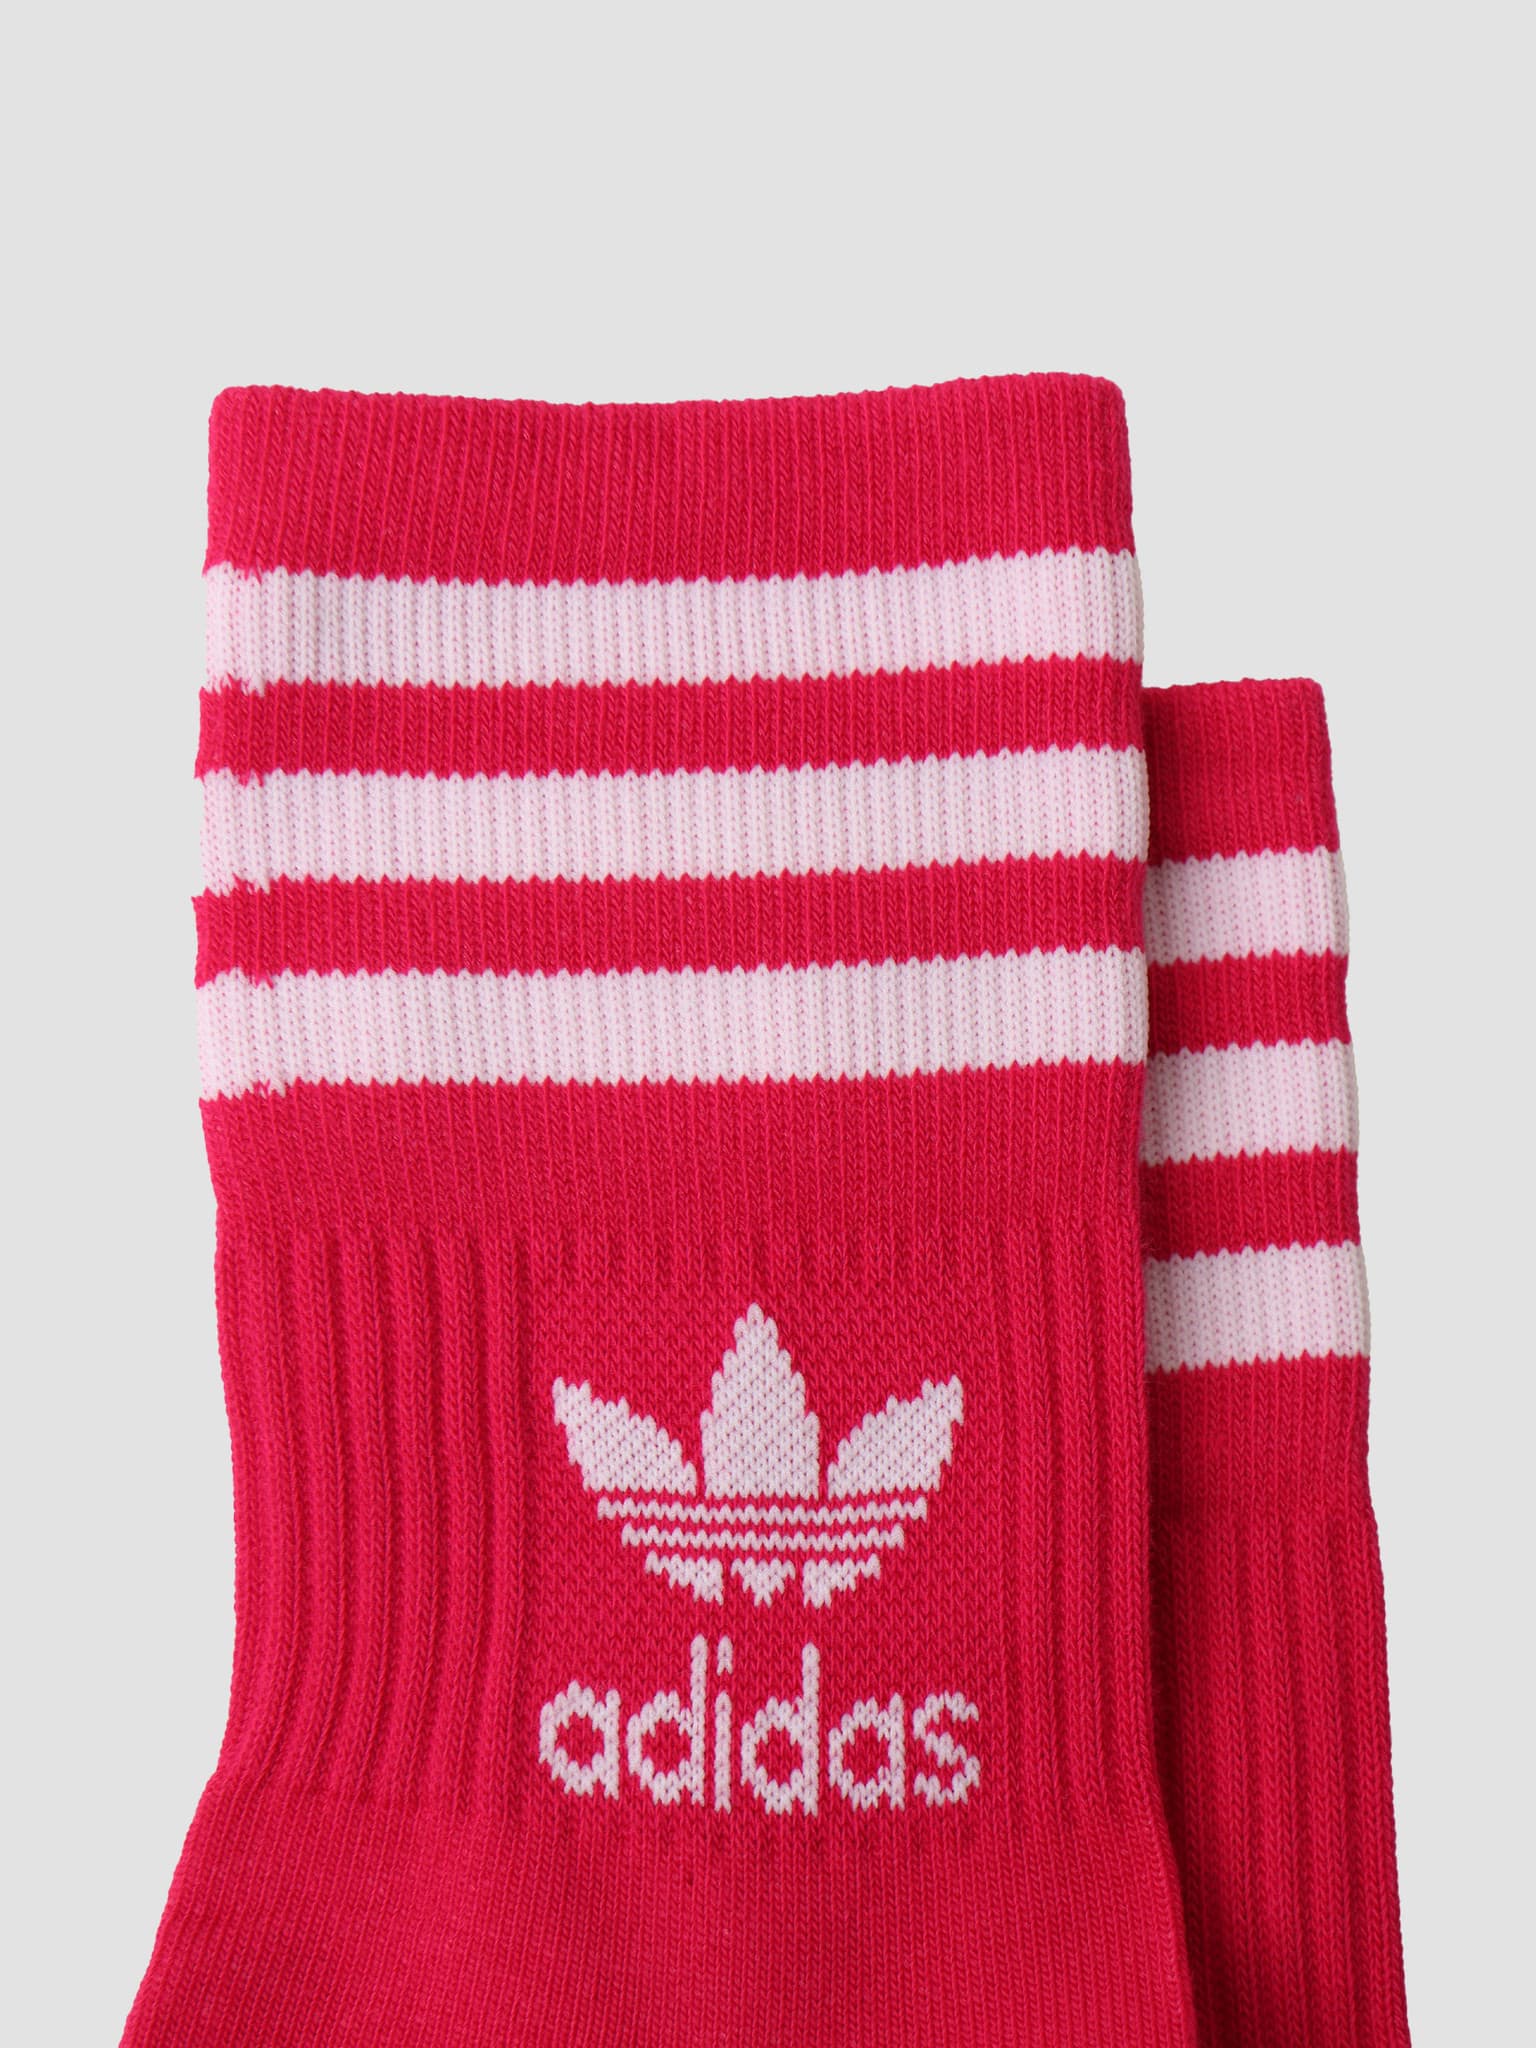 Mid Cut Crew Socks White Bold Pink Bold Red H32335